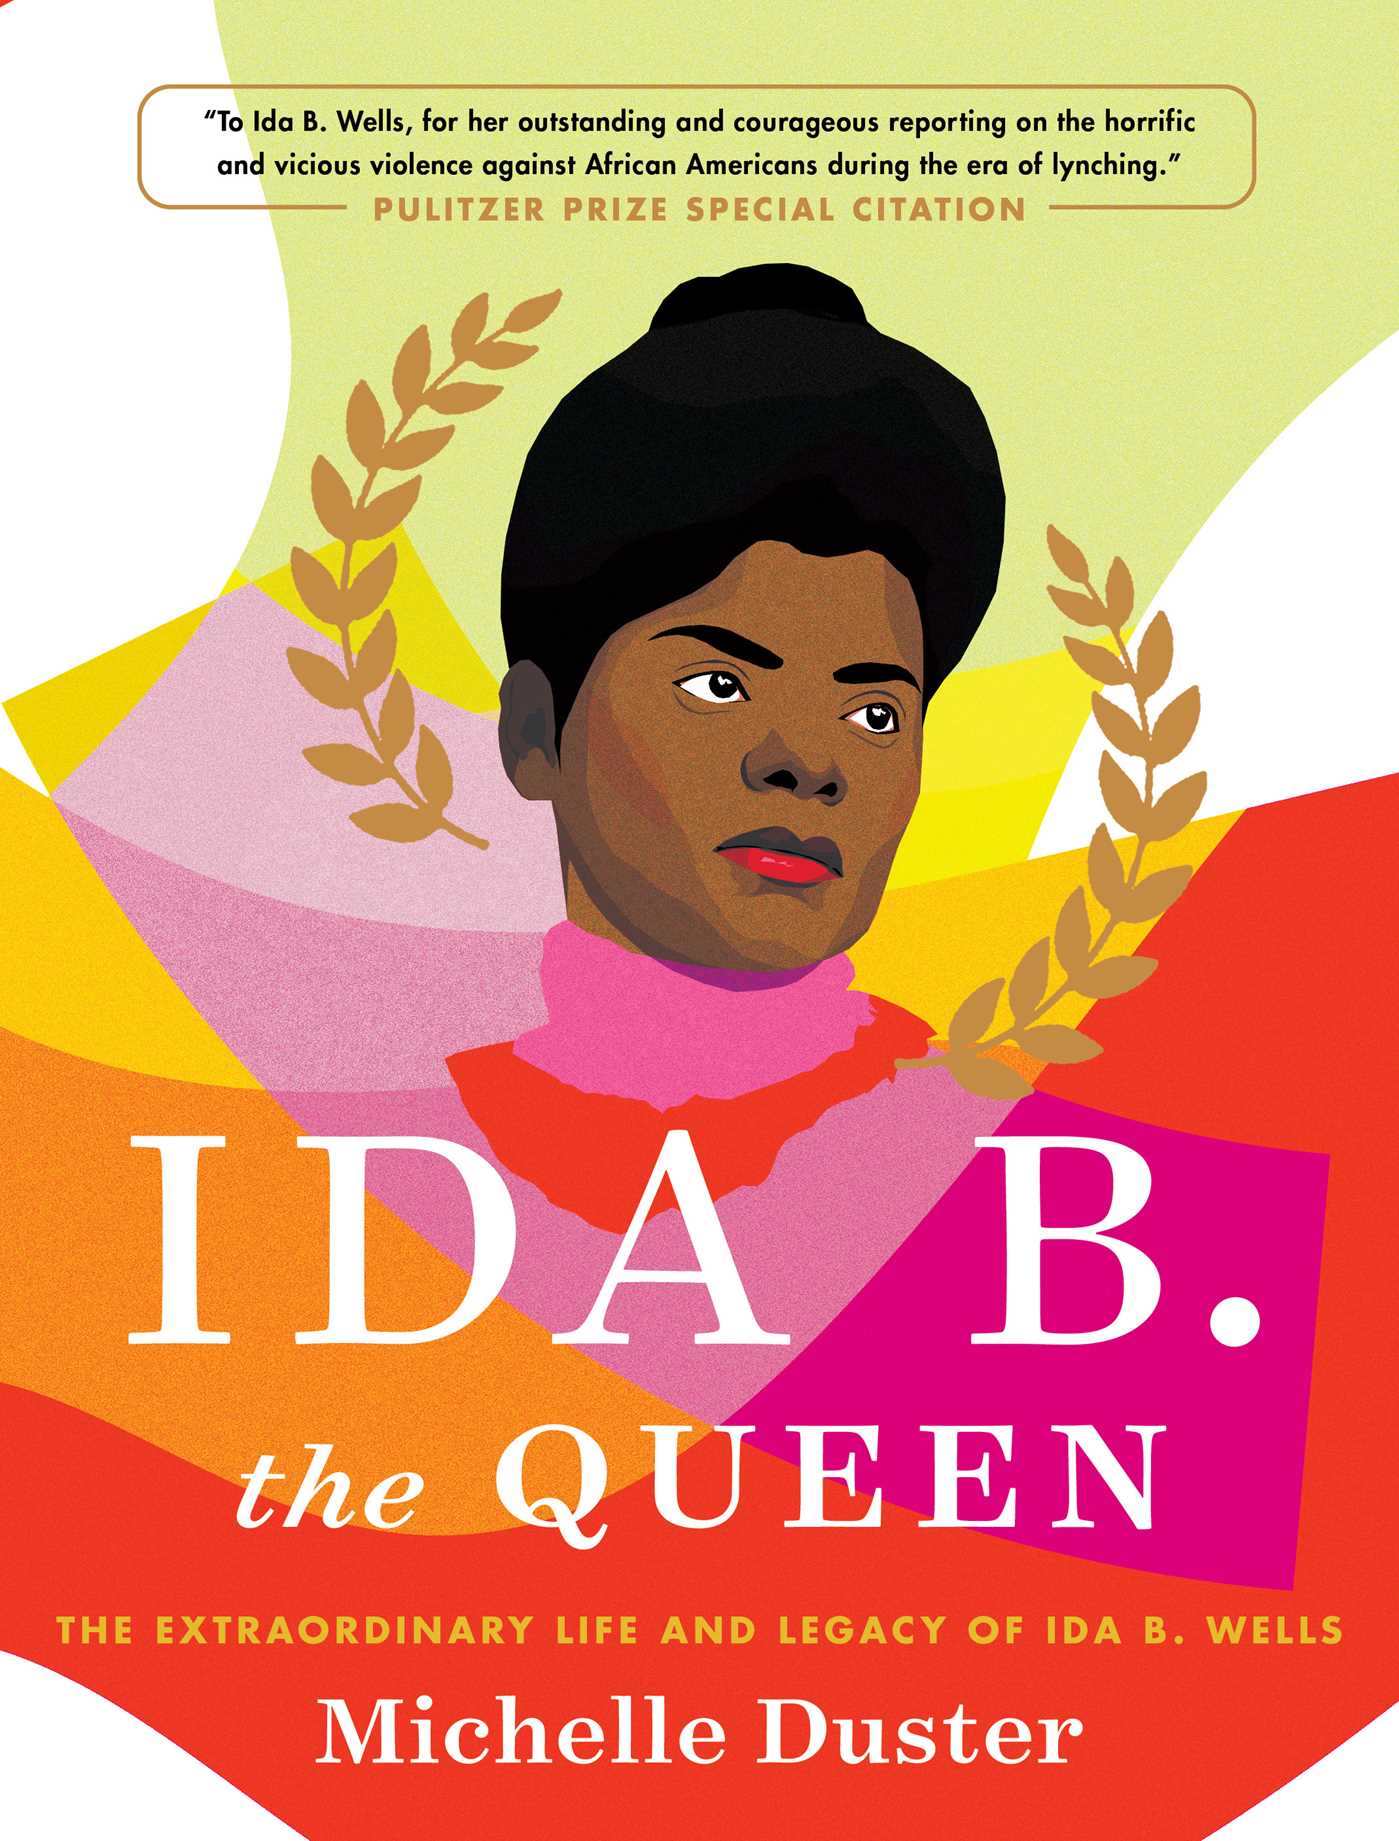 Cover of Ida B. The Queen, illustration of Ida B. Wells in front of colorful geometric background